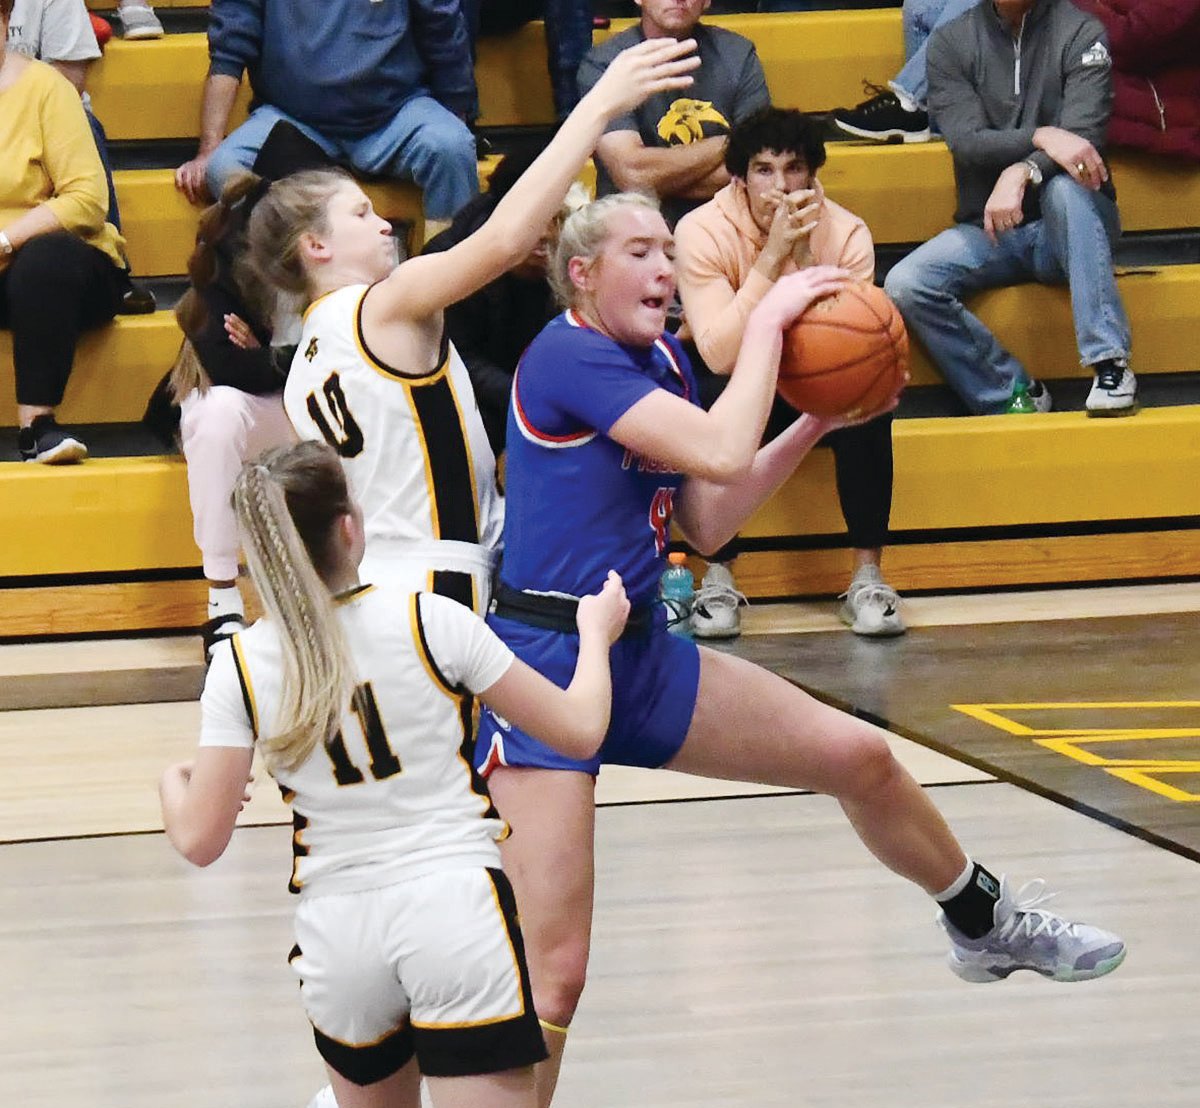 Moberly's Asa Fanning grabs a rebound during Monday's game versus Monroe City.